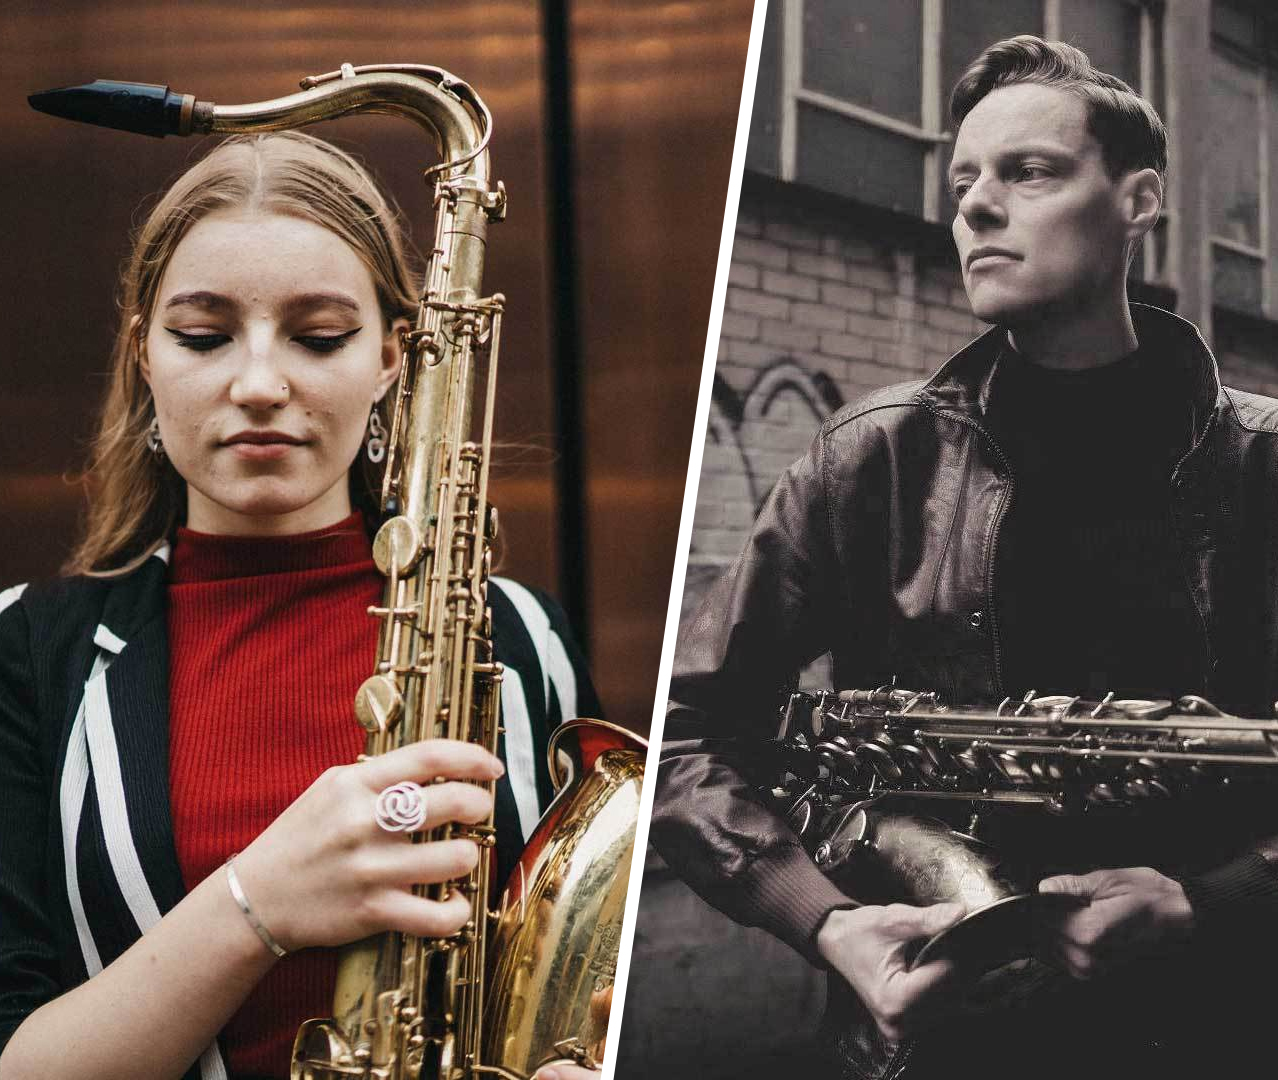 New Generation Jazz Festival Roadshow @ Ropetackle Arts Centre, Buy One Get One Free Tickets – February 8th